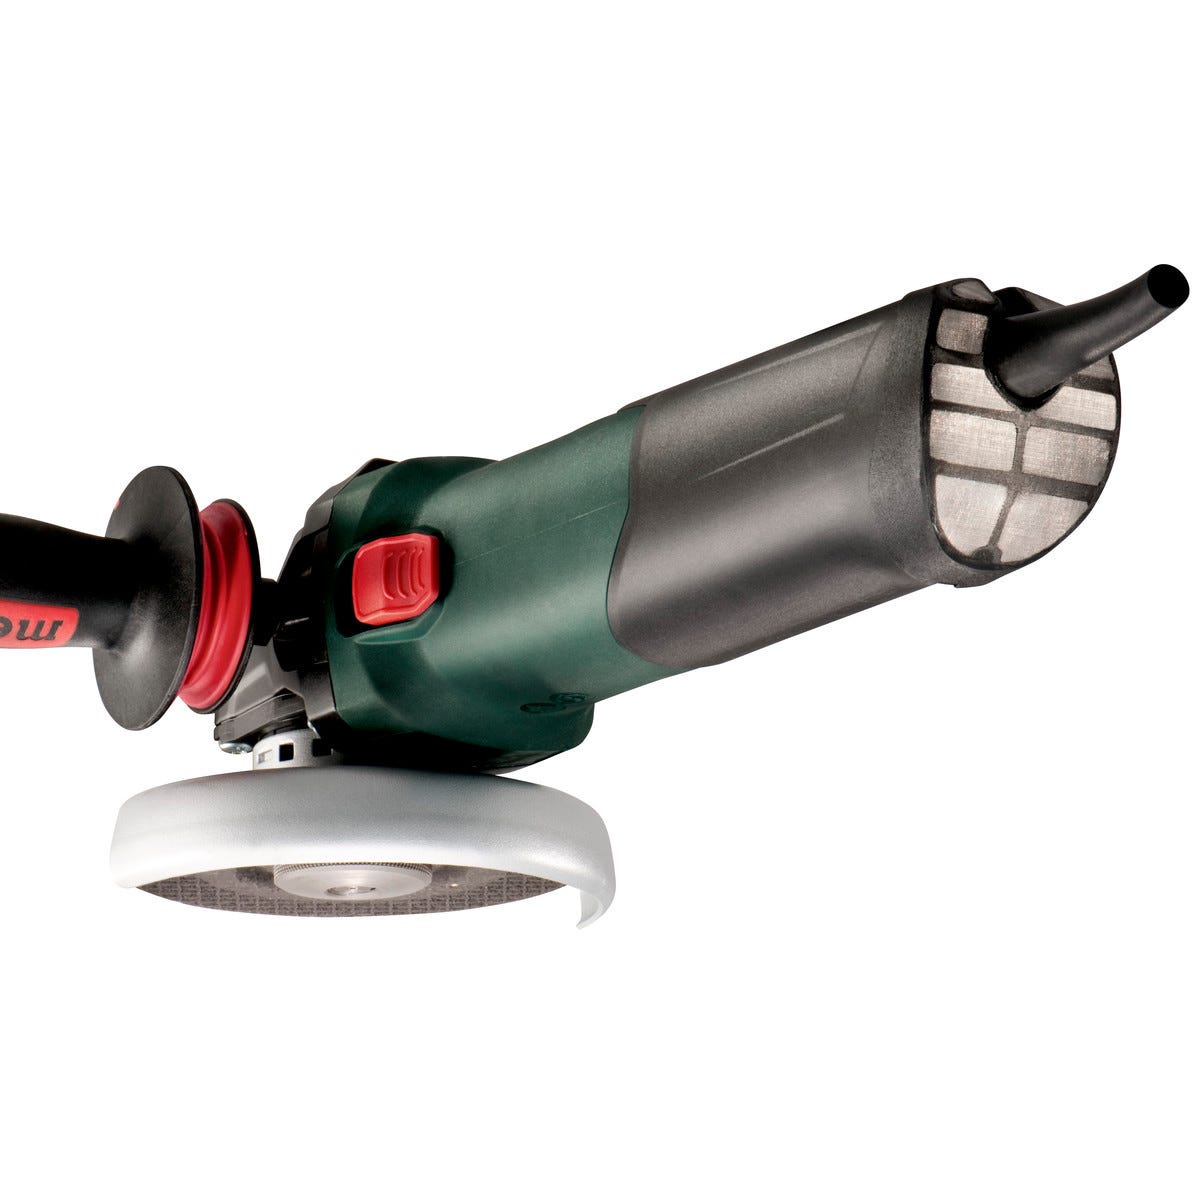 Meuleuse d'angle 1700 W 150 mm 4.3 Nm WEA 17-150 Quick Metabo 3